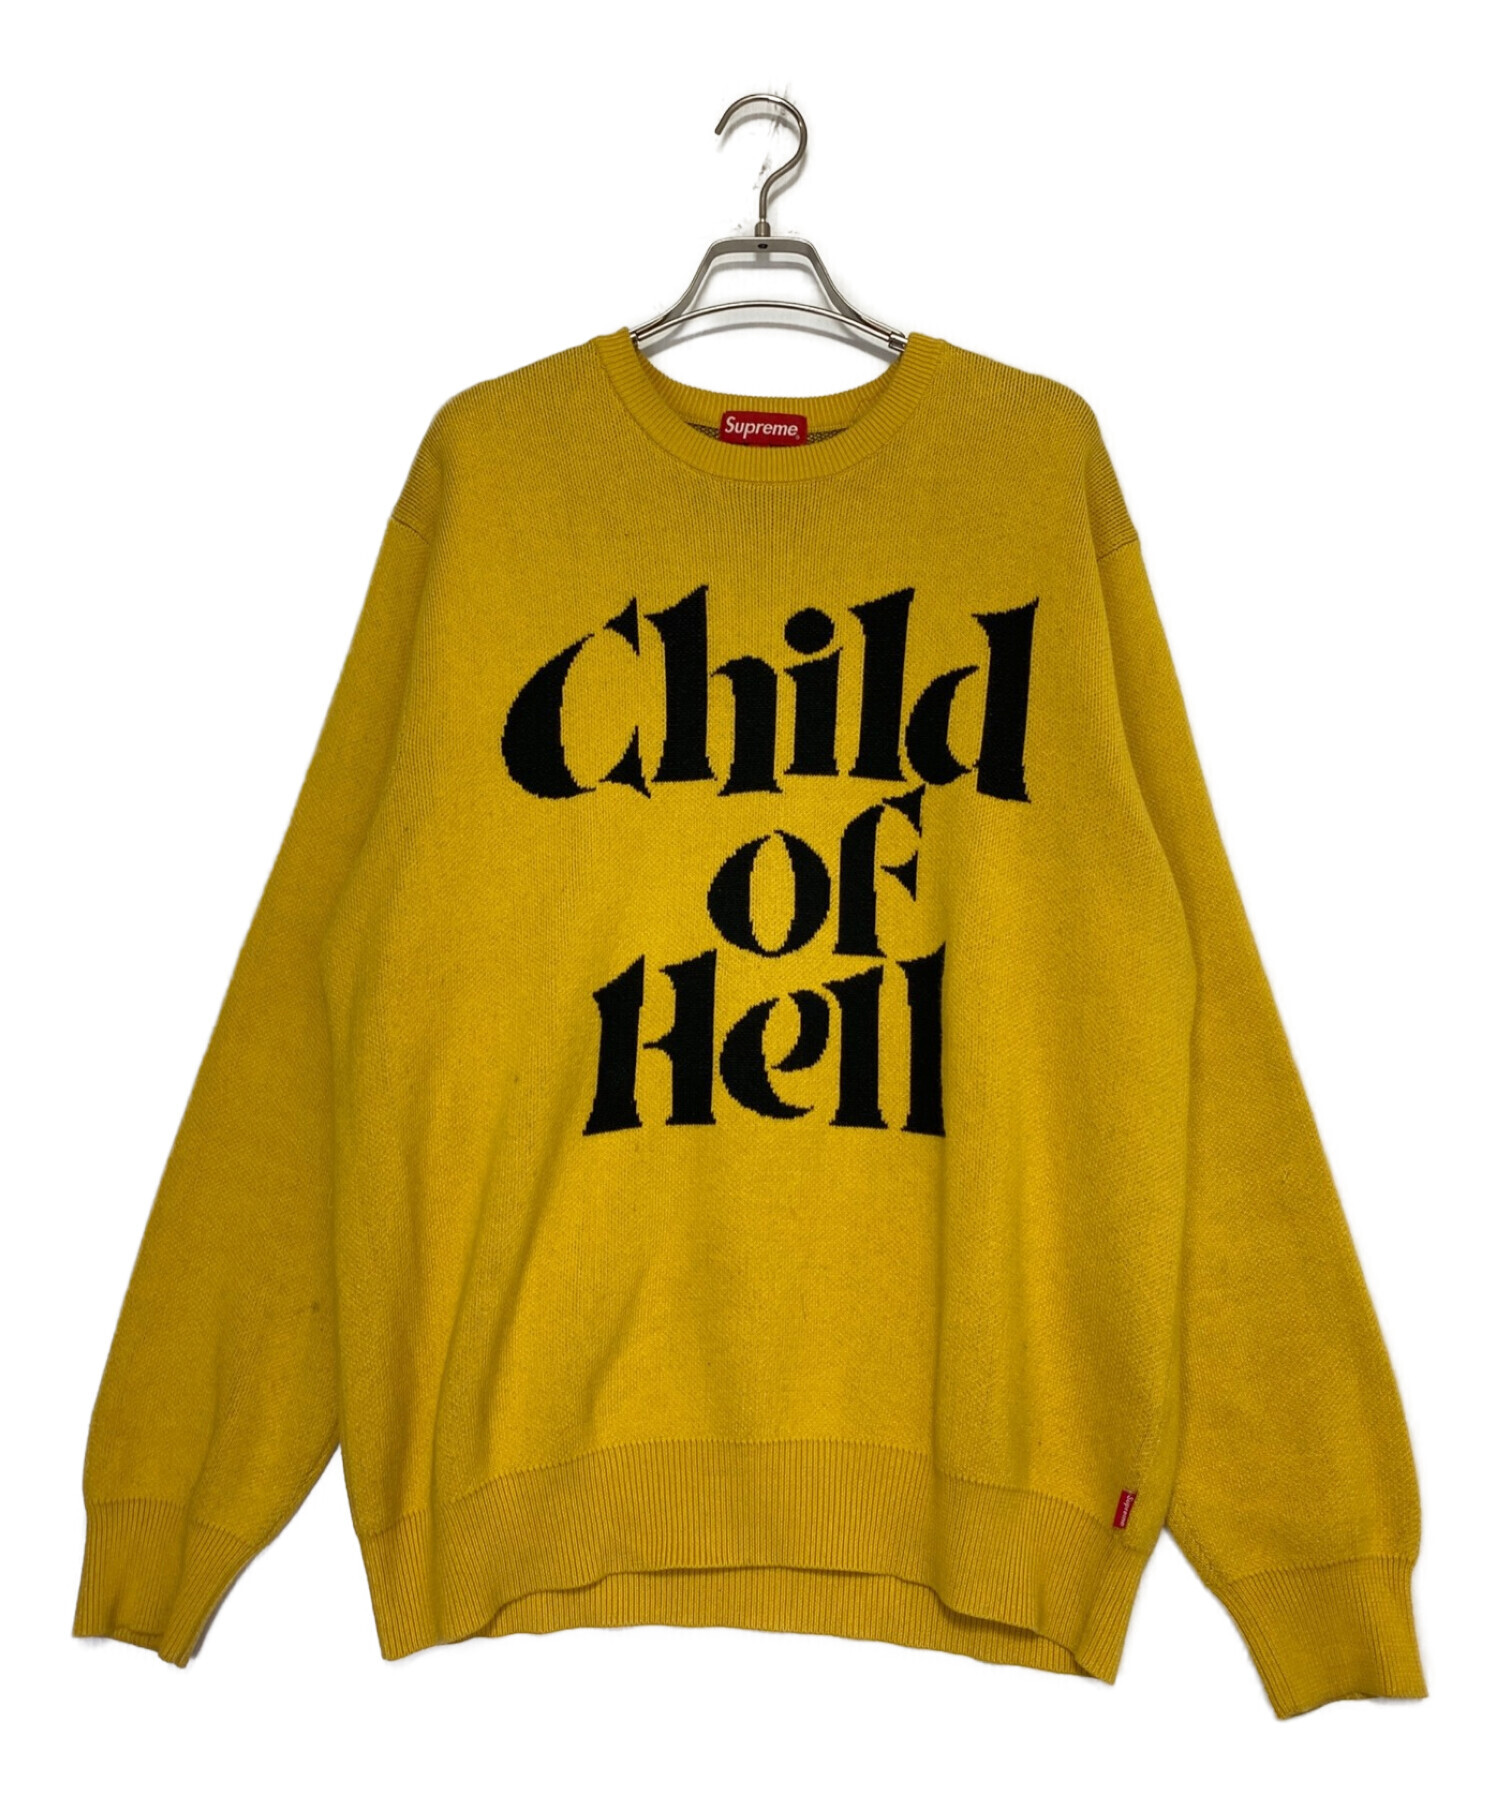 Supreme Child of hell sweater XL